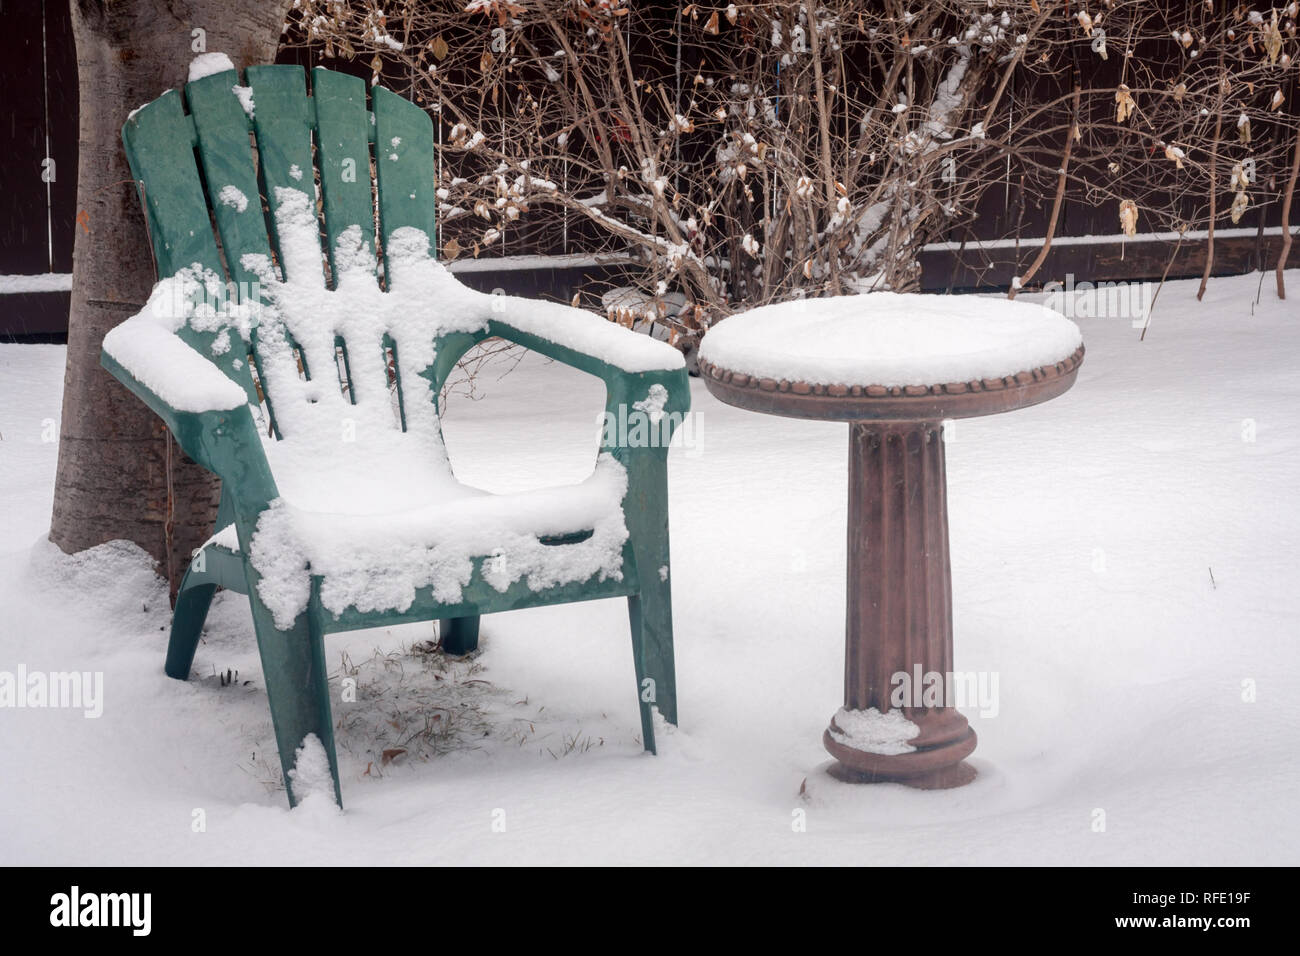 Winter is no time to sit in a cold back yard, and water will freeze in birdbath.  Snow covers all in City of Calgary, Alberta, Canada. Stock Photo